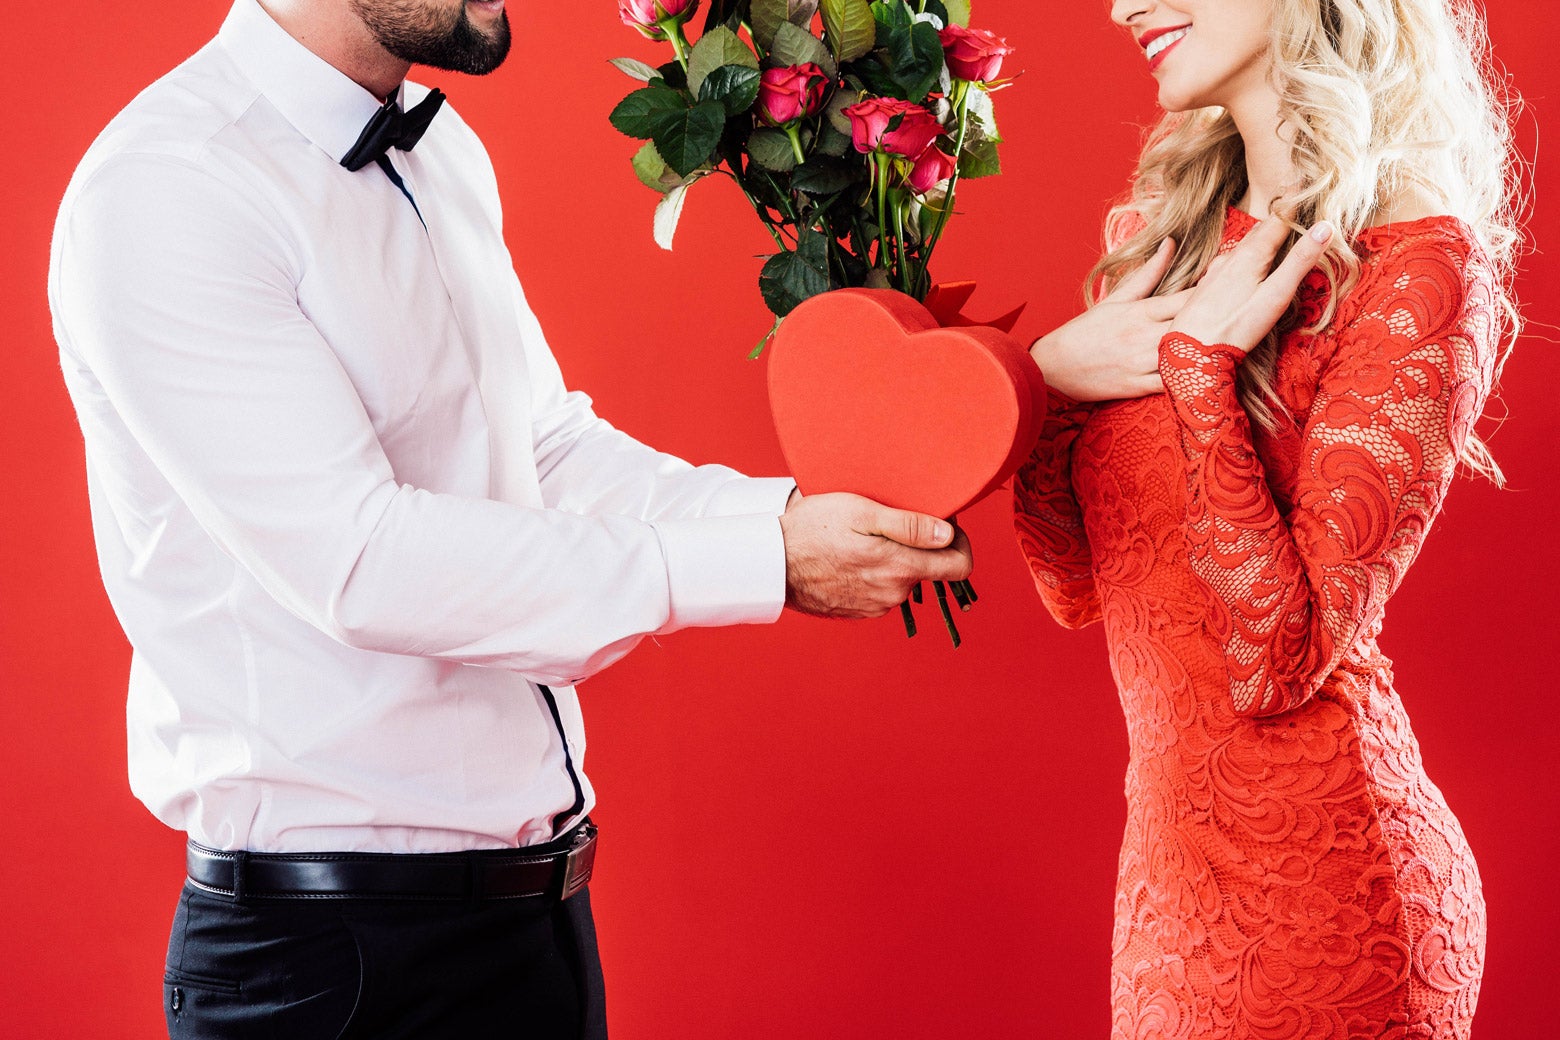 Man giving a woman chocolates and flowers for Valentine's Day.